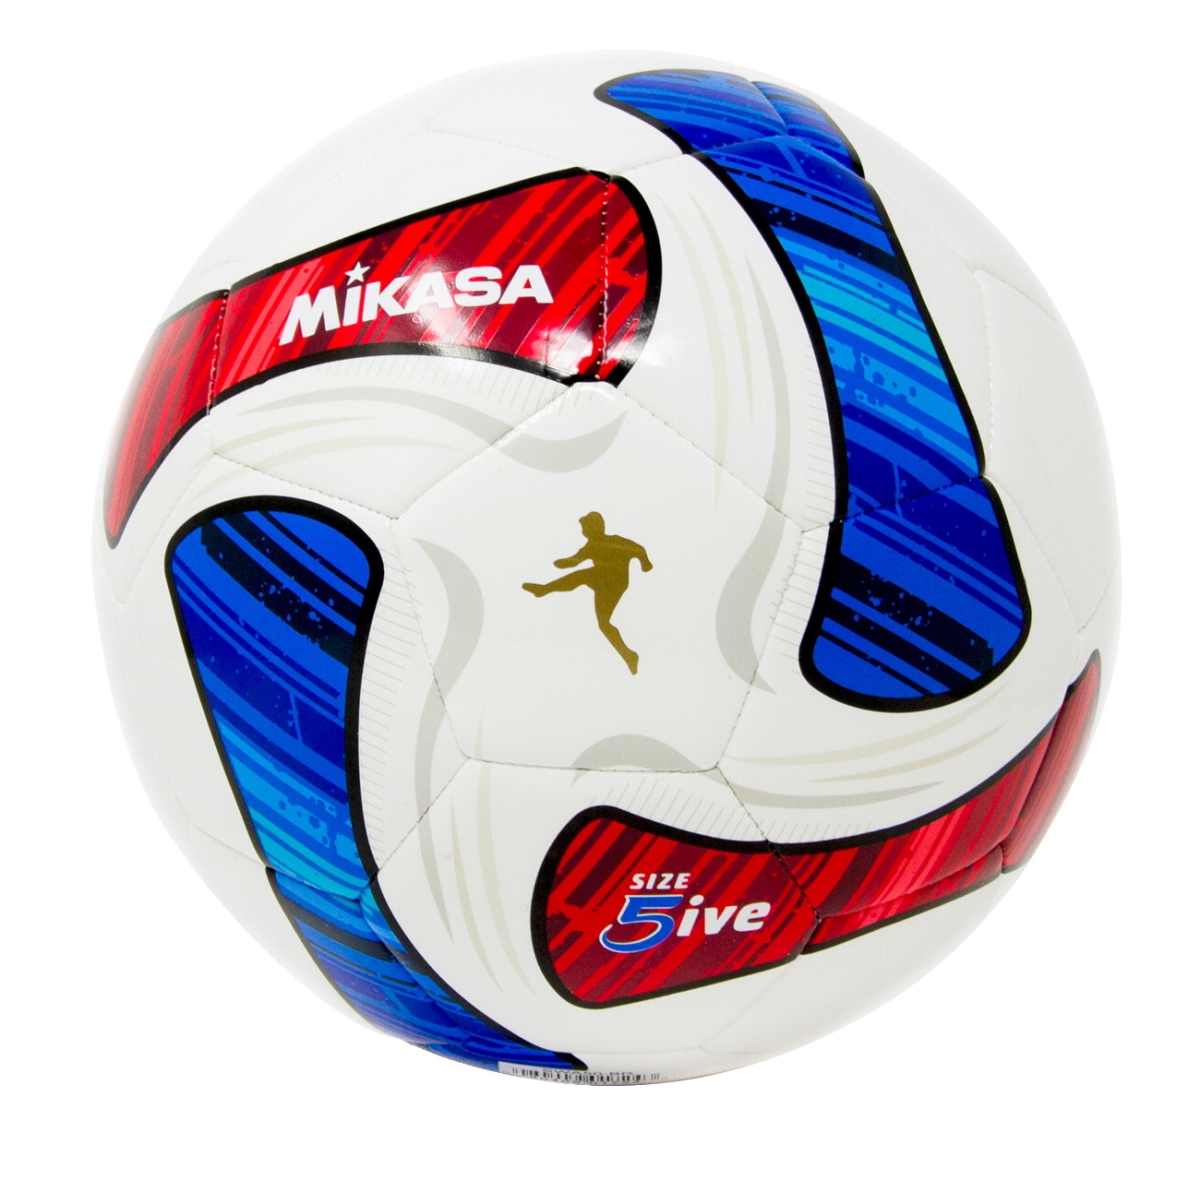 2003092 Swa Series Soccer Ball, White, Blue & Red - Size 5